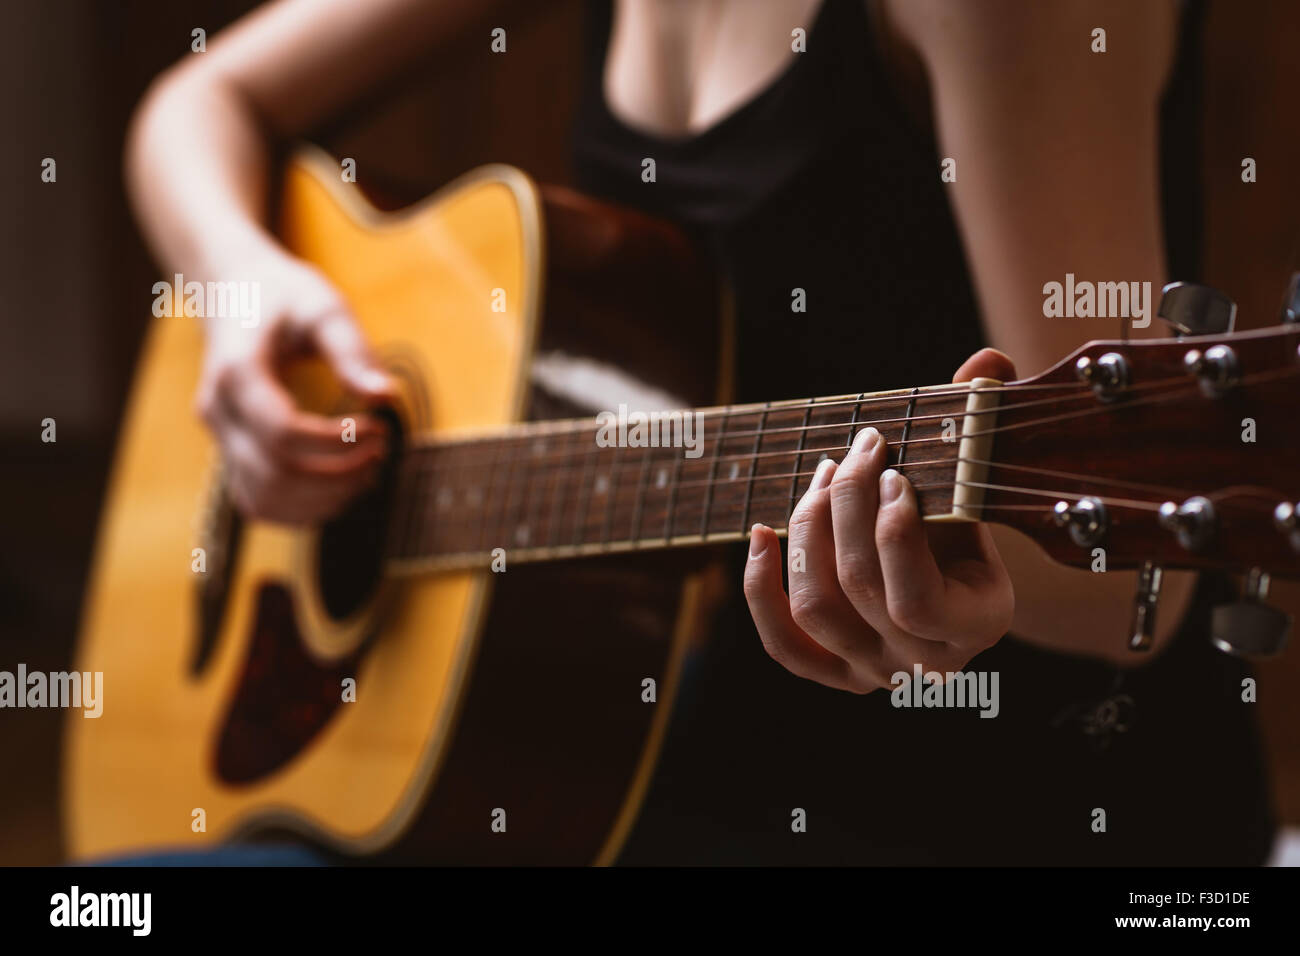 woman's hands playing  acoustic guitar, close up Stock Photo